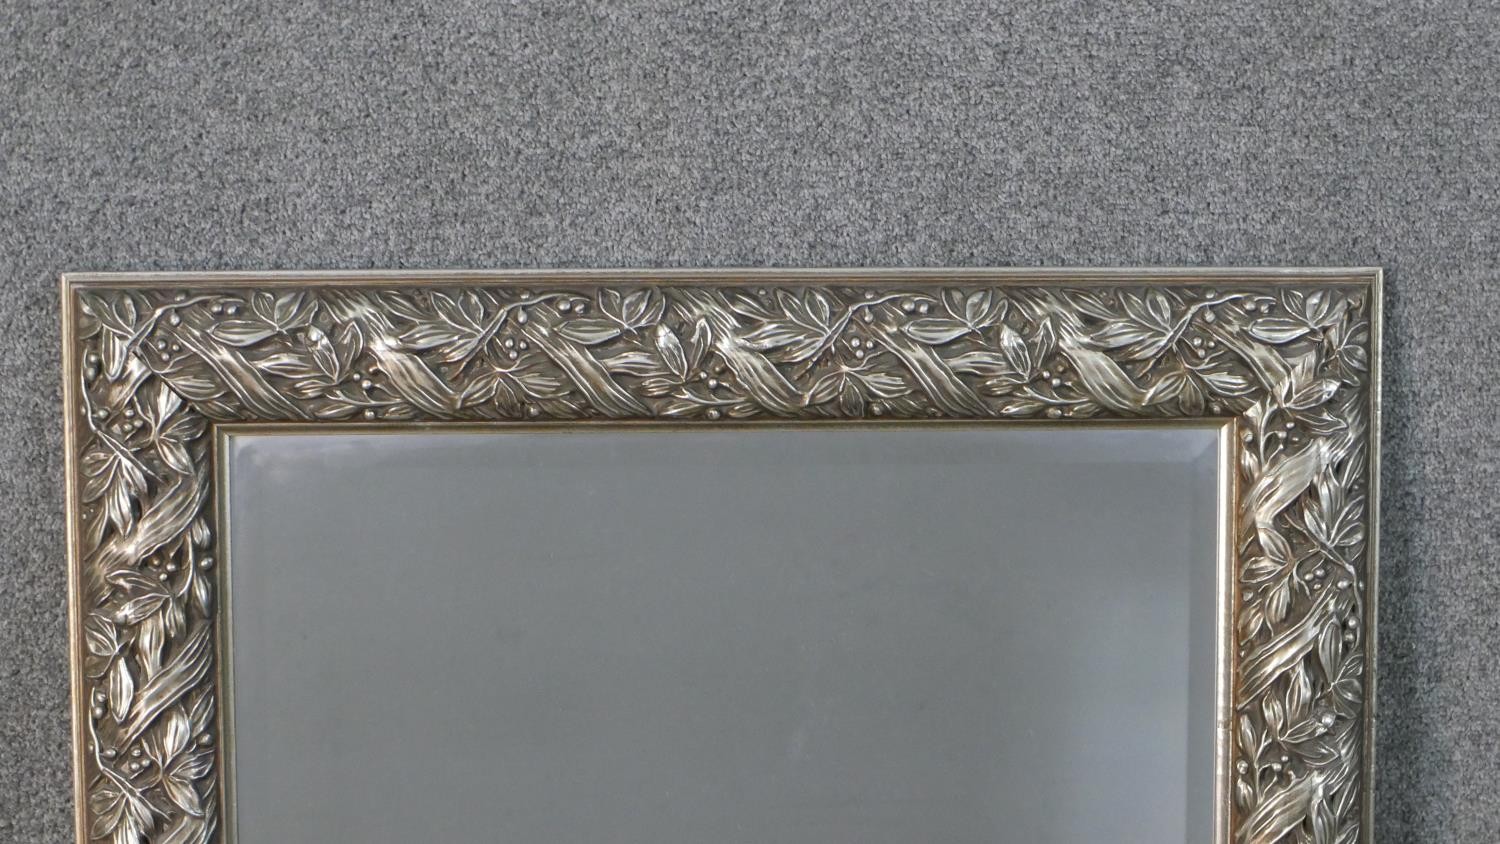 A silver painted moulded foliate and ribbon design wall mirror. H.107 W.78cm - Image 3 of 4